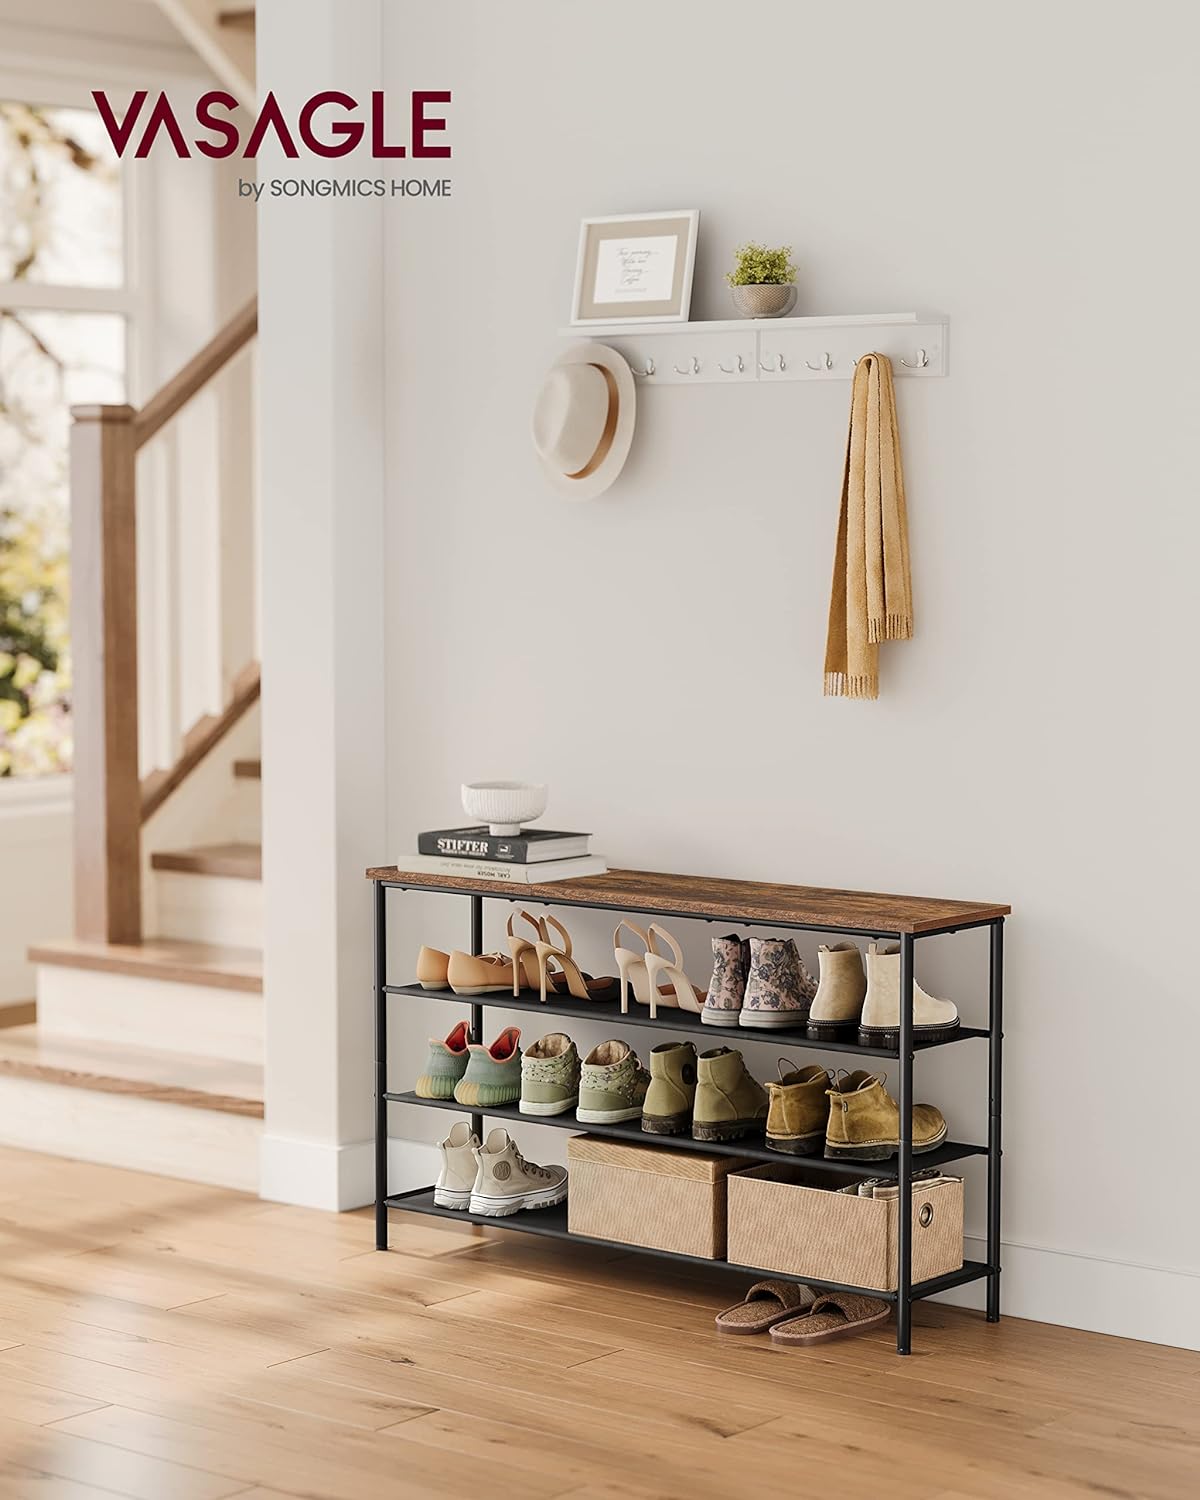 https://bigbigmart.com/wp-content/uploads/2023/12/VASAGLE-Shoe-Rack-4-Tier-Shoe-Storage-Rack-for-15-18-Pairs-of-Shoes-Shoe-Organizer-for-Entryway-with-3-Fabric-Shelves-and-Wooden-Top-Steel-Frame-Industrial-Rustic-Brown-and-Black-ULBS135B011.jpg